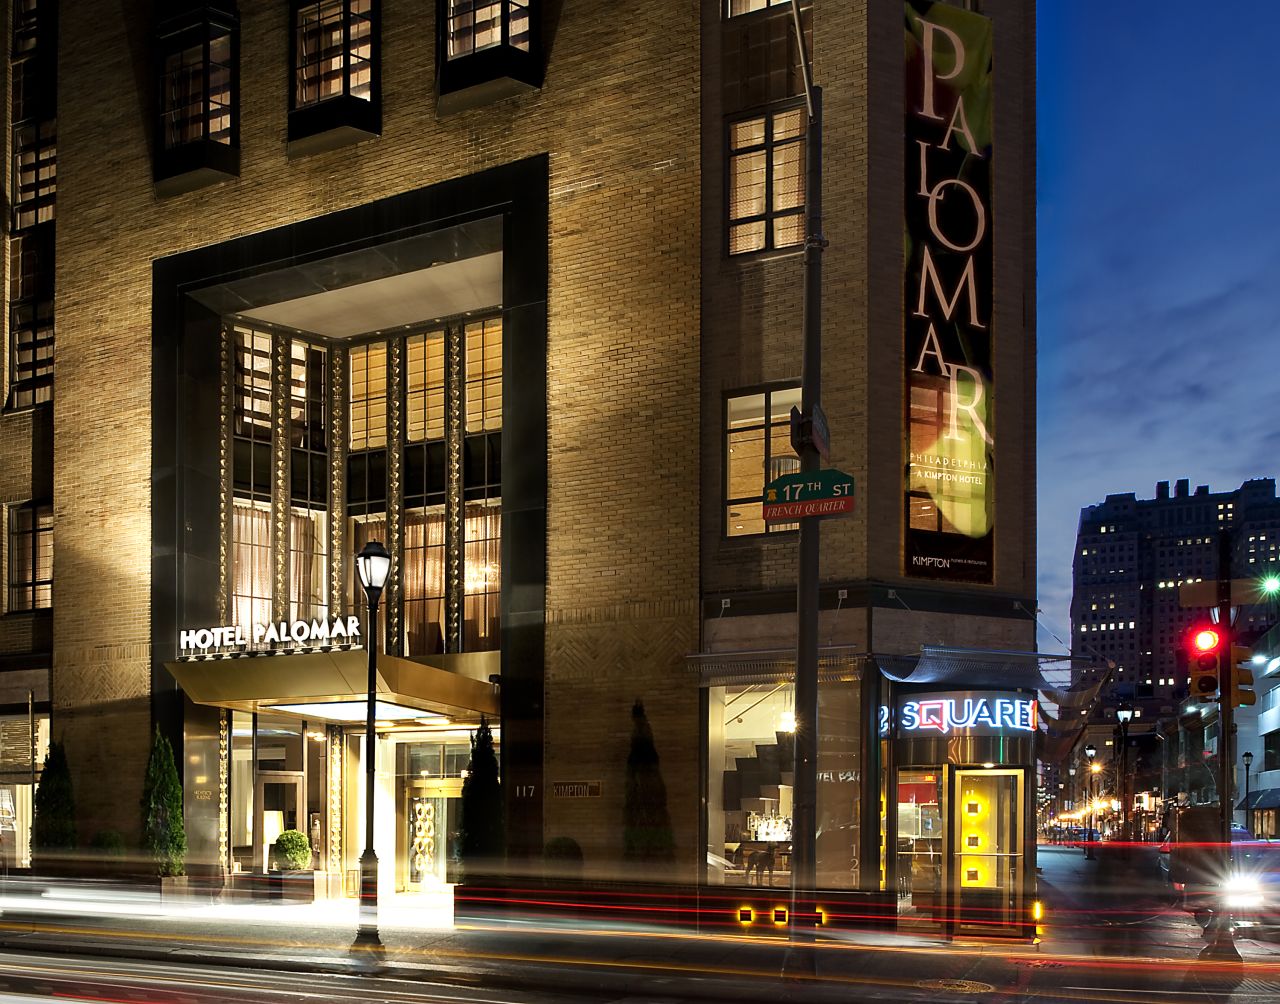 The Hotel Palomar Philadelphia is offering packages in conjunction with "<a href="http://www.penn.museum/sites/2012/" target="_blank" target="_blank">Maya 2012 -- Lord of Times</a>," an exhibition at the nearby Penn Museum.